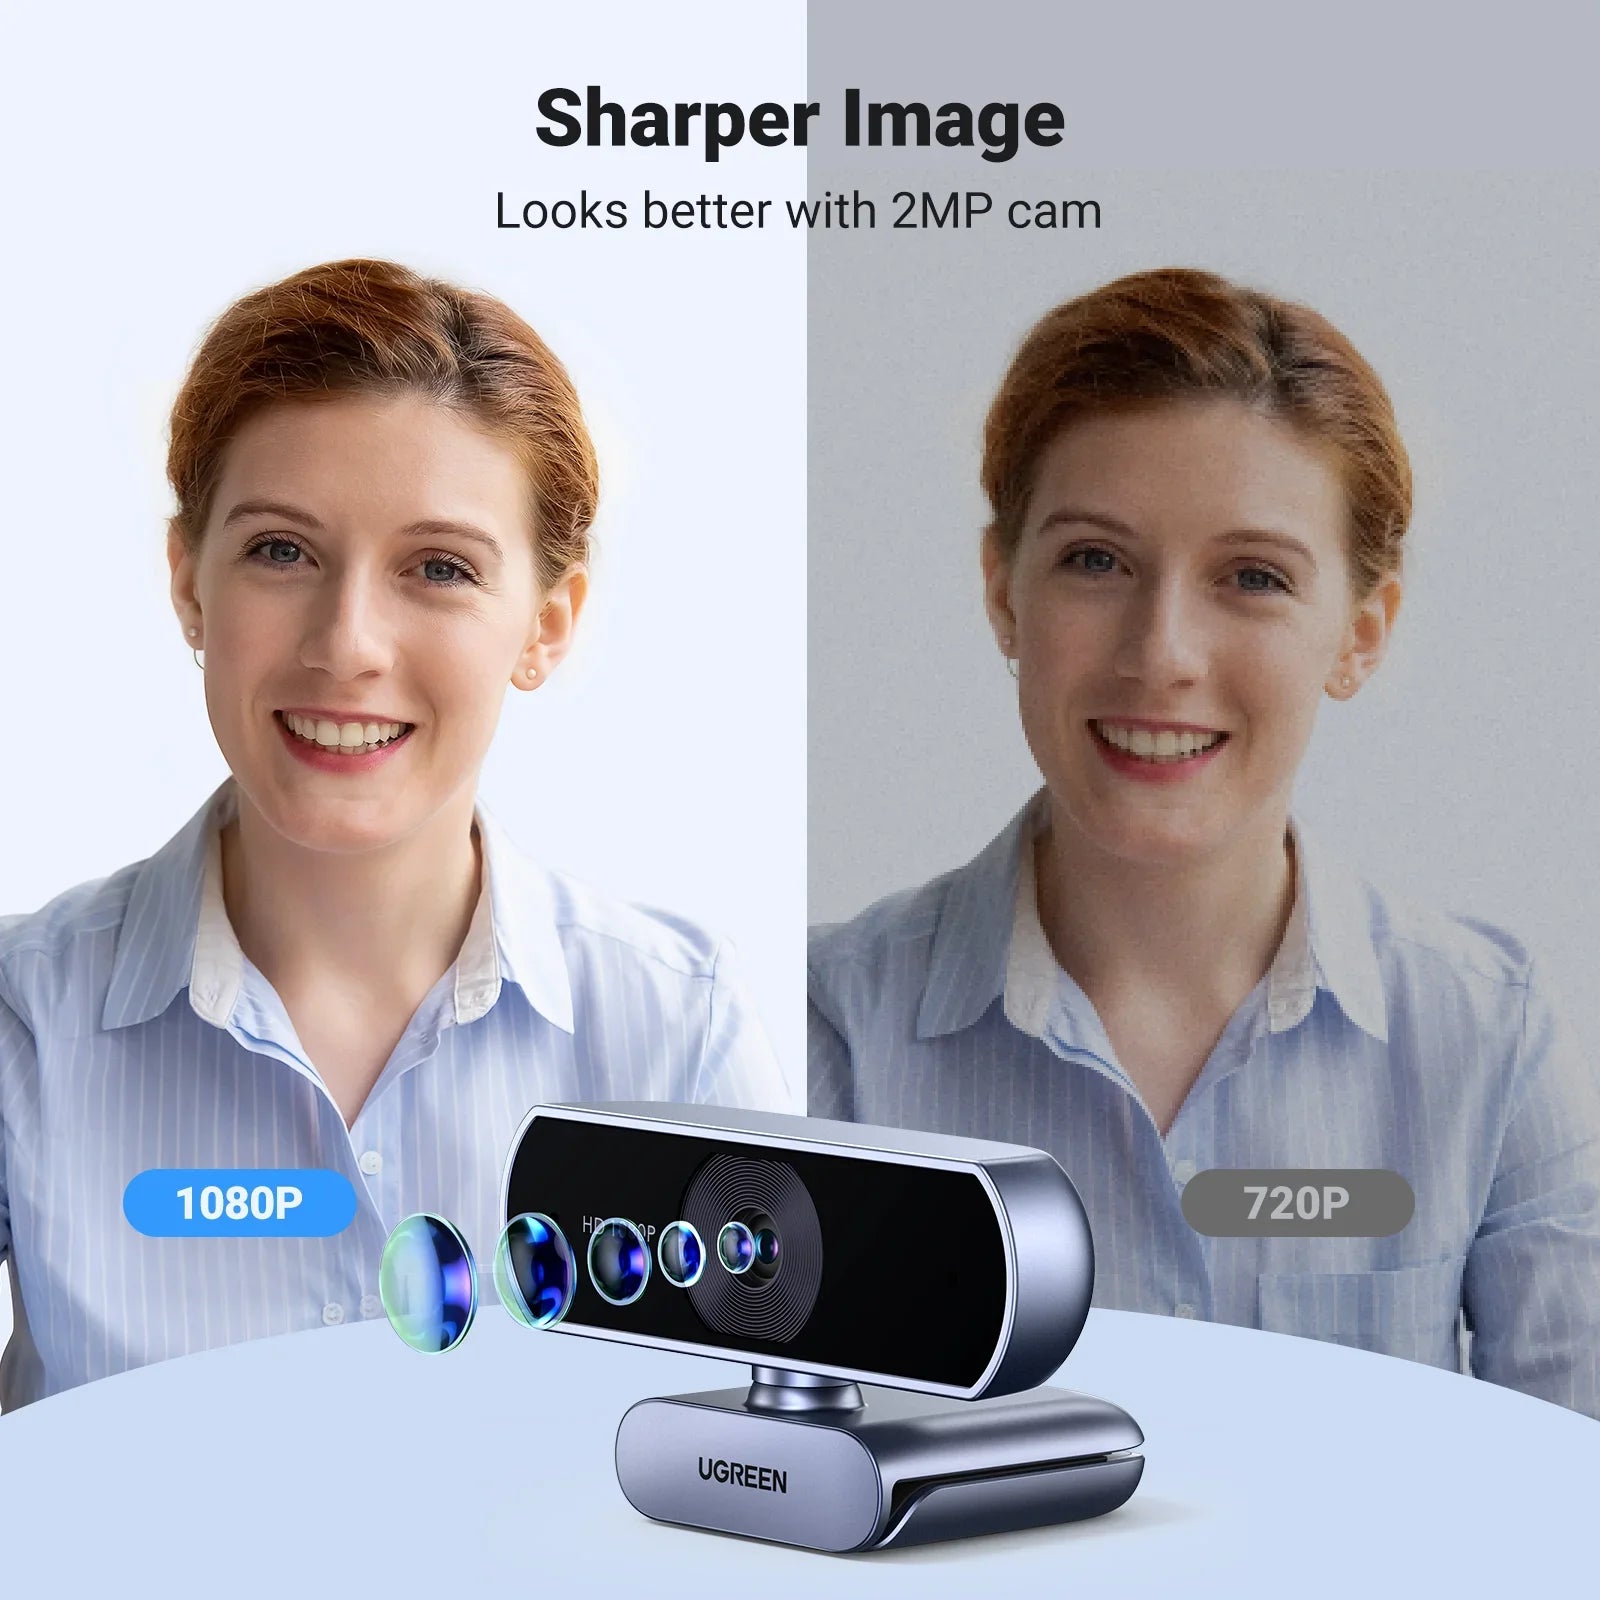 UGREEN HD Webcam with Dual Microphones: Clear 1080P Video, Wide View Angle  ourlum.com   